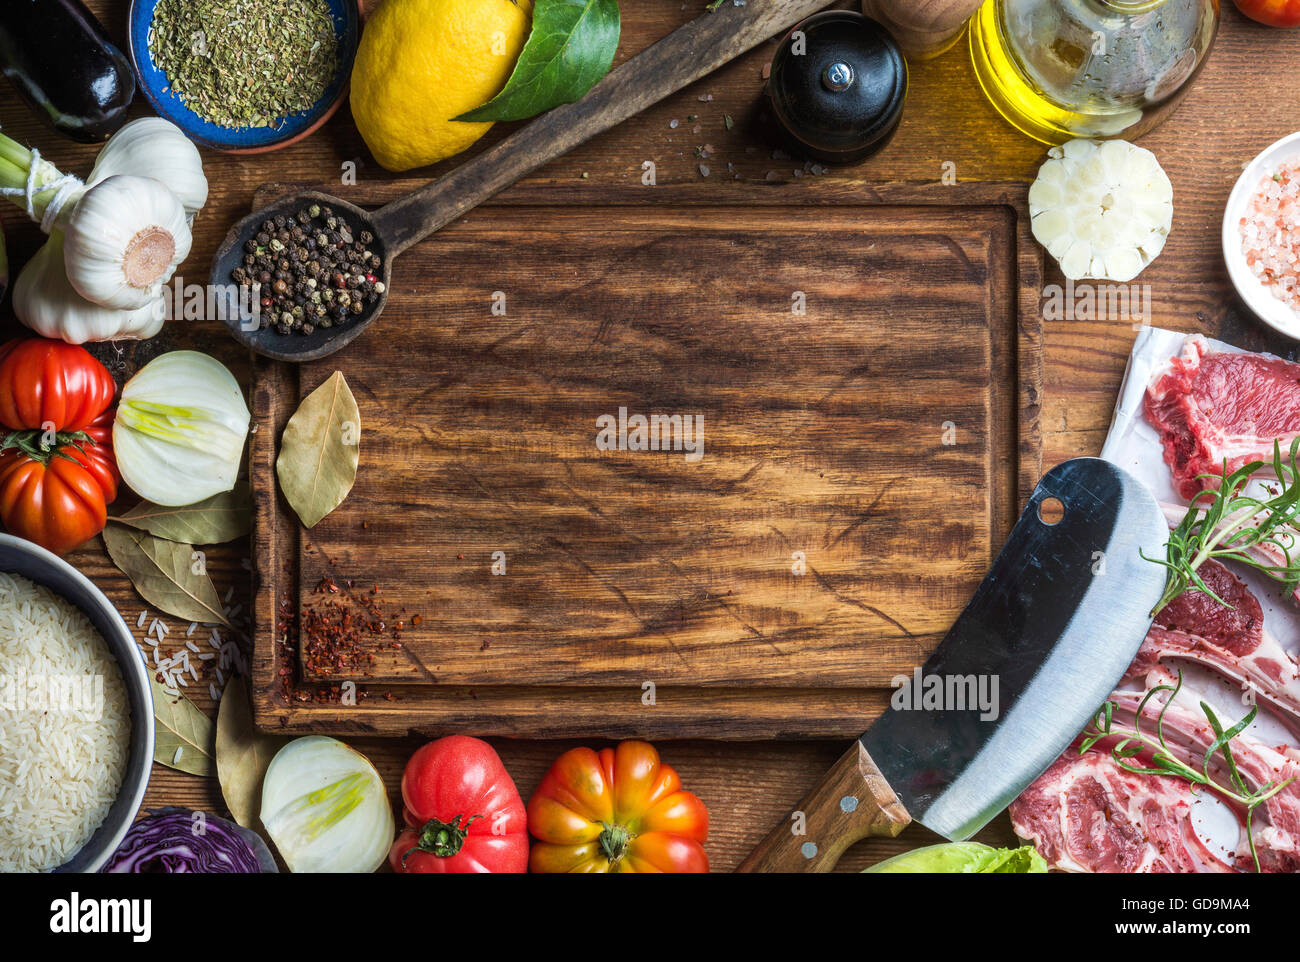 Ingredients for cooking healthy meat dinner. Raw uncooked lamb chops with vegetables, rice, herbs, olive oil and spices over rus Stock Photo